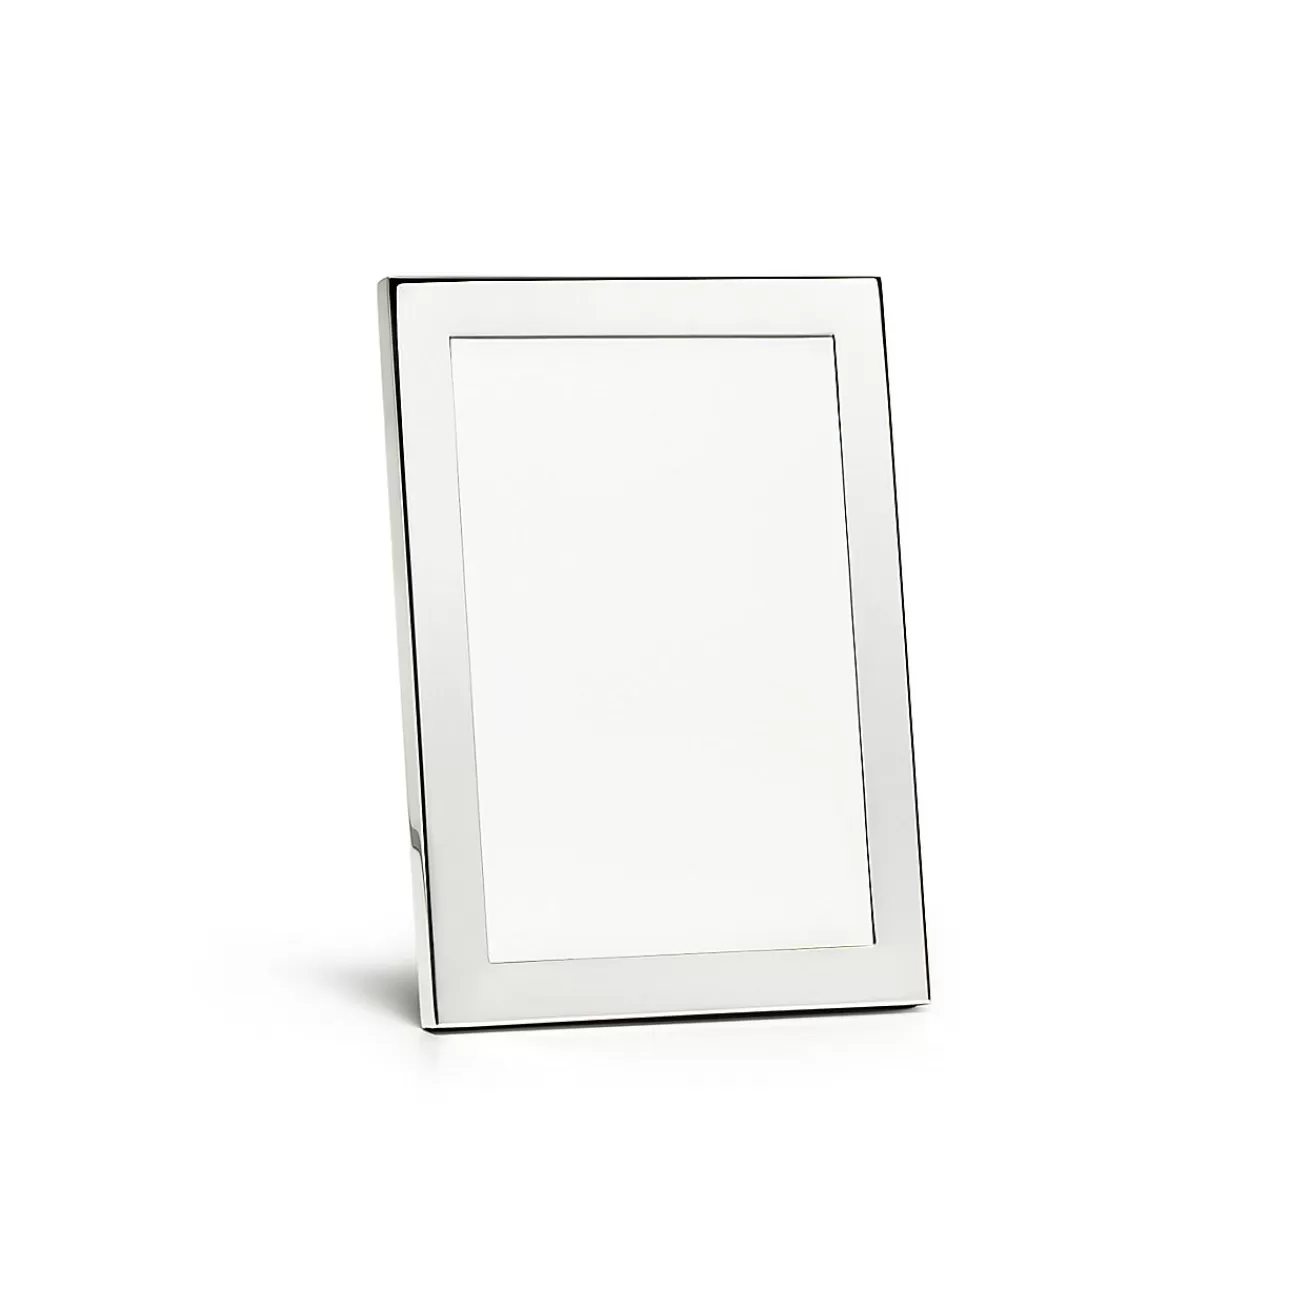 Tiffany & Co. Rectangular frame in sterling silver, size 4 x 6" with window opening. | ^ The Home | Housewarming Gifts